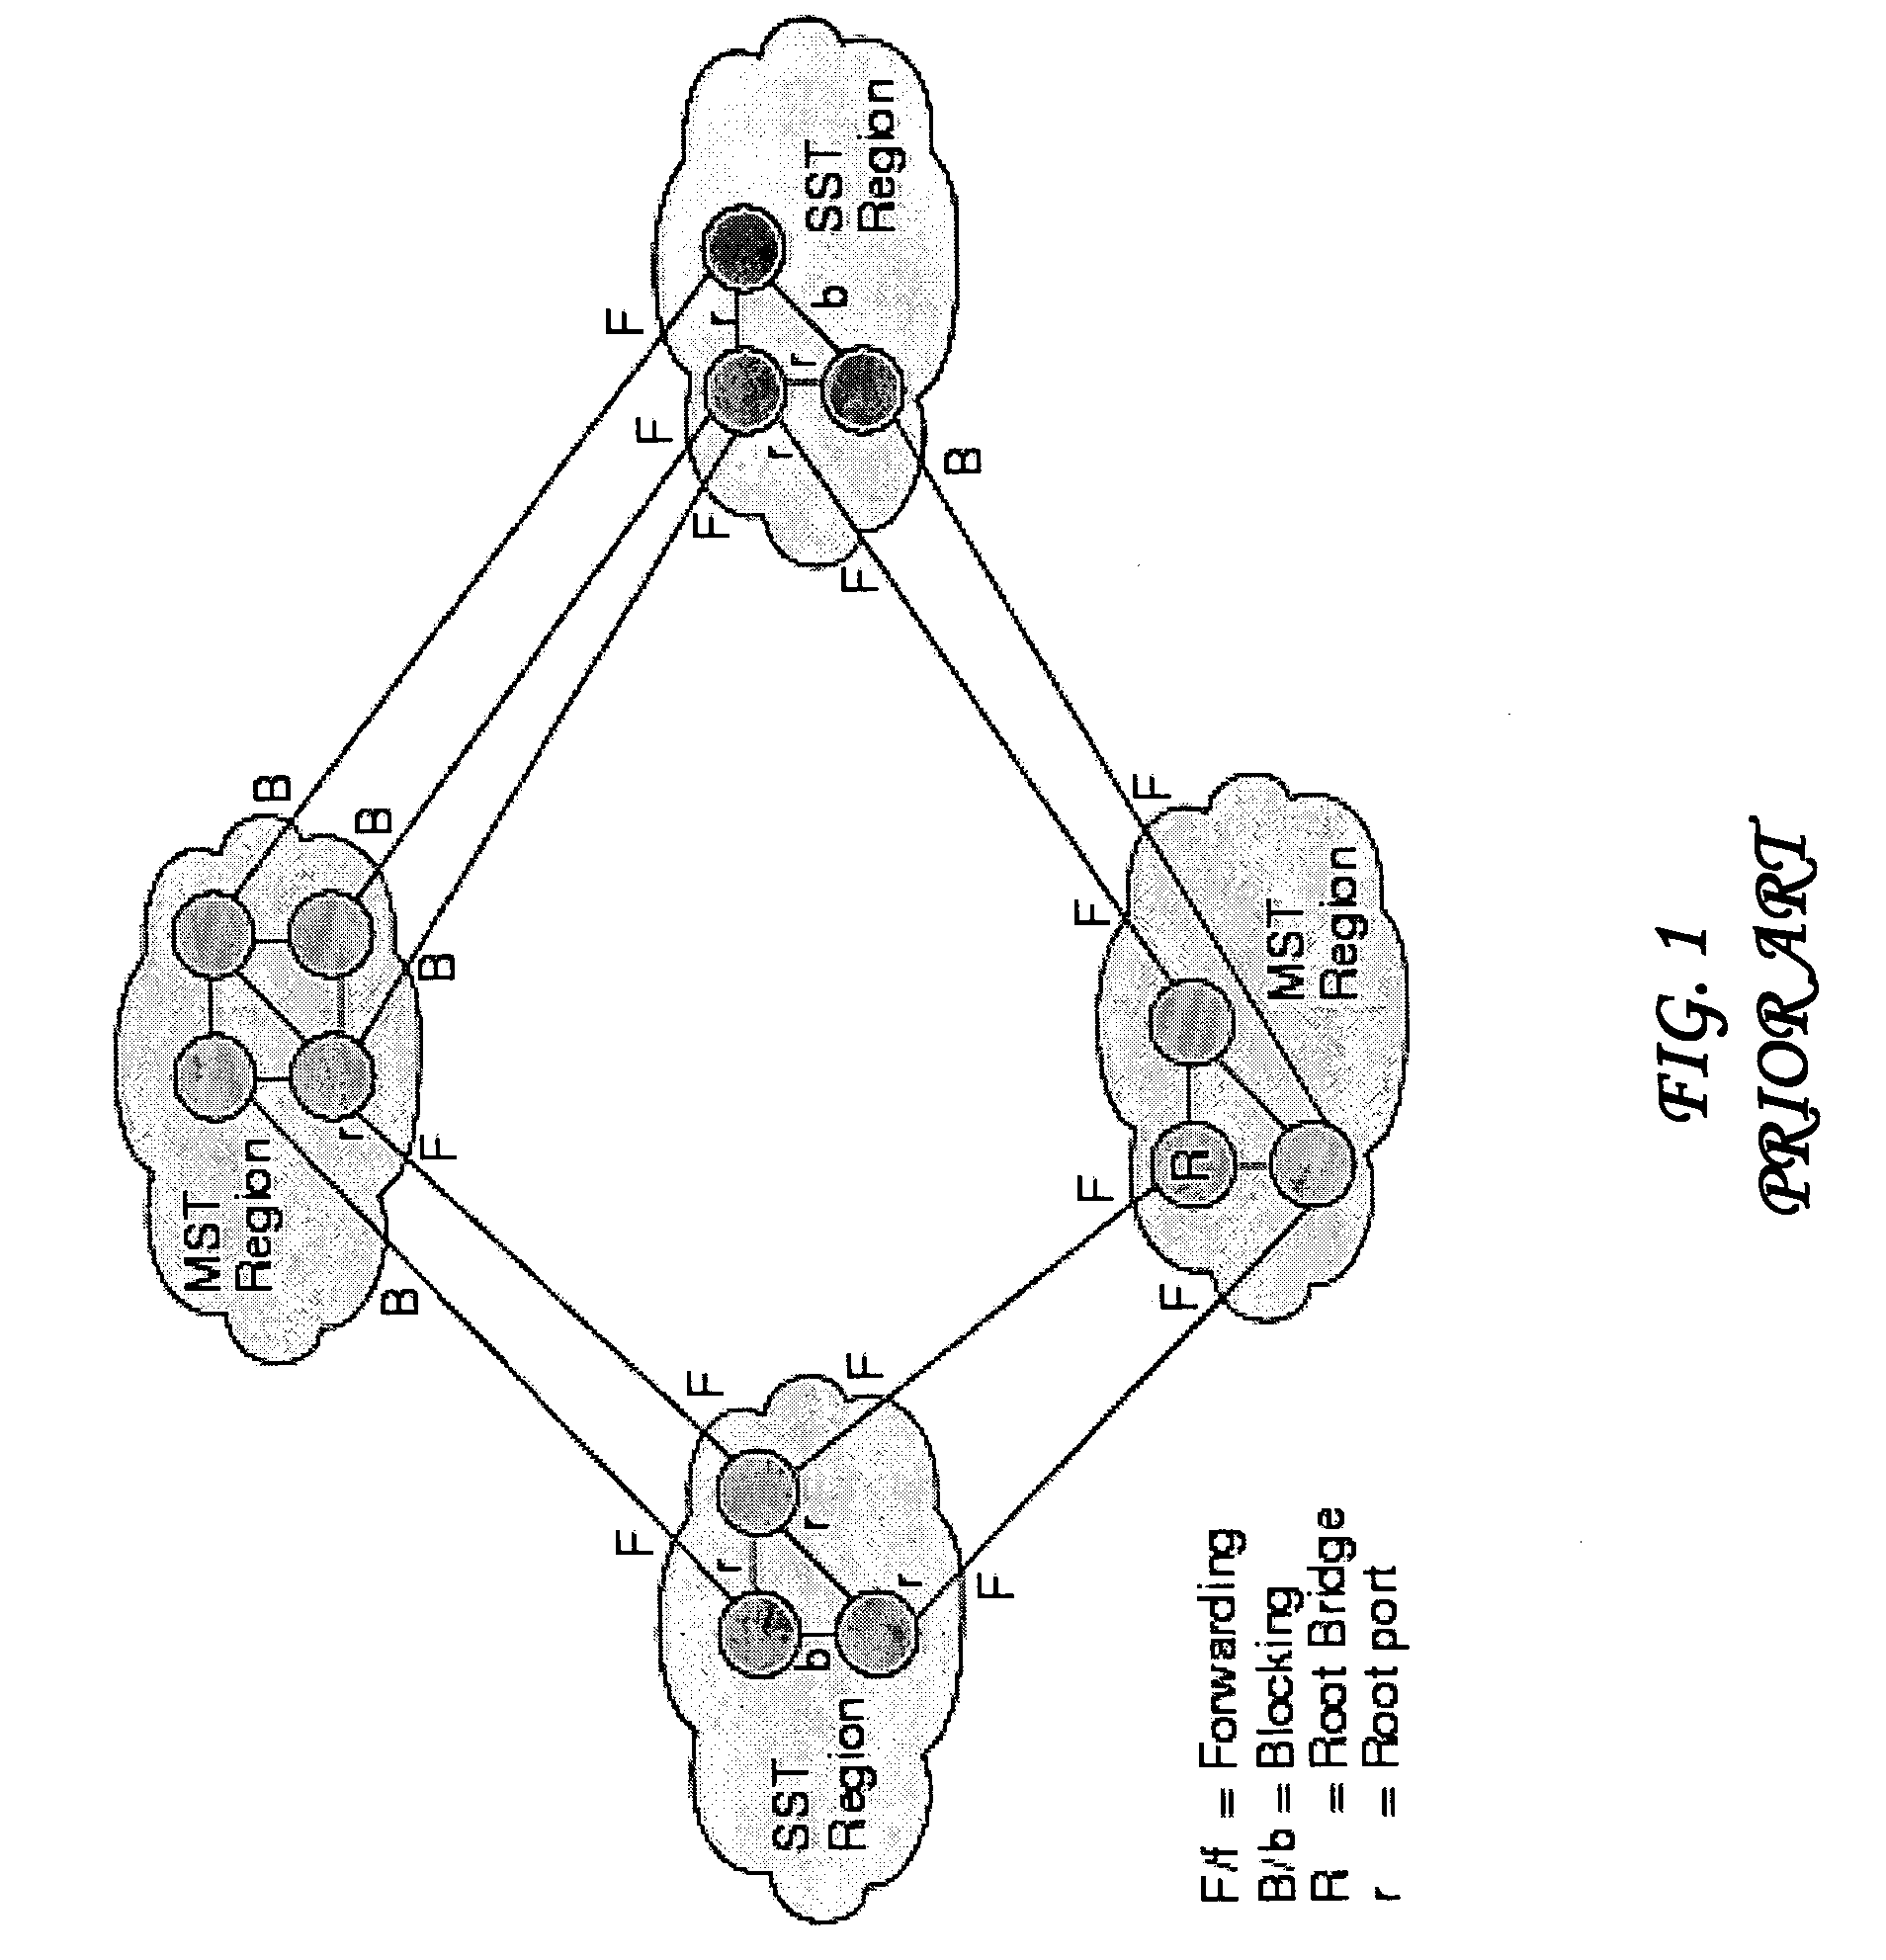 System and method for determining the mergeability of spanning tree instances